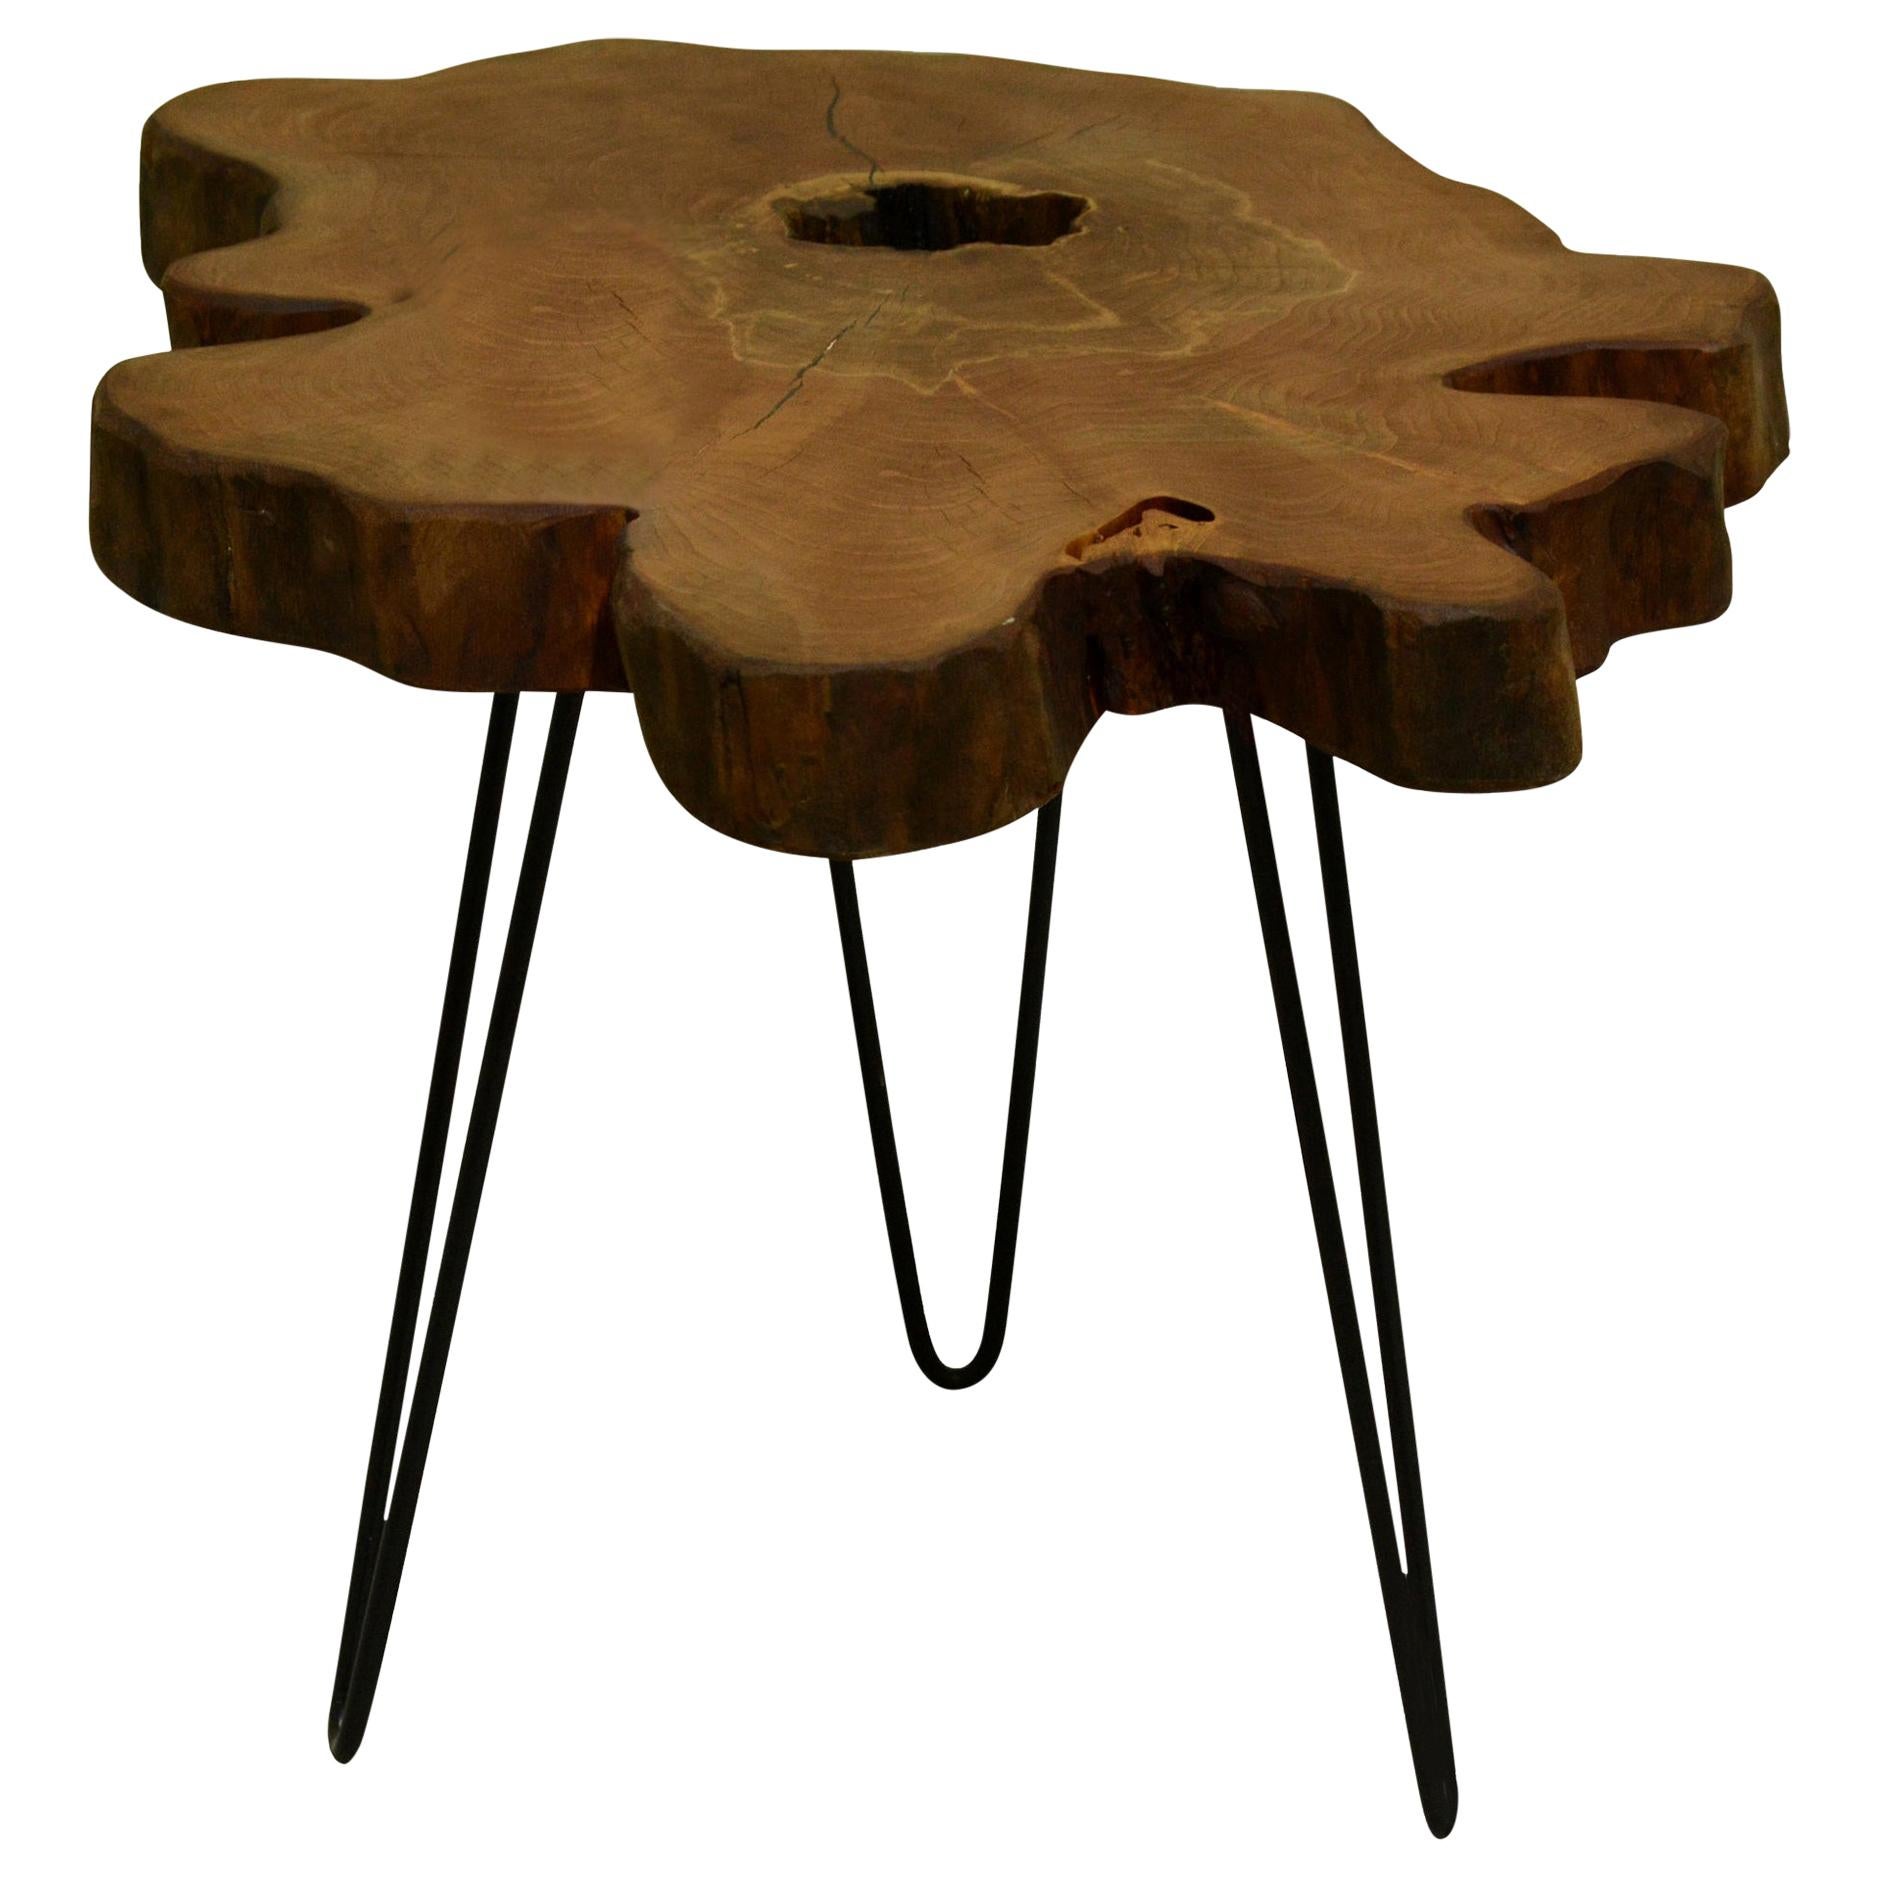 Redwood Tree Live Edge Coffee Table with Hairpin Legs / LECT153 For Sale